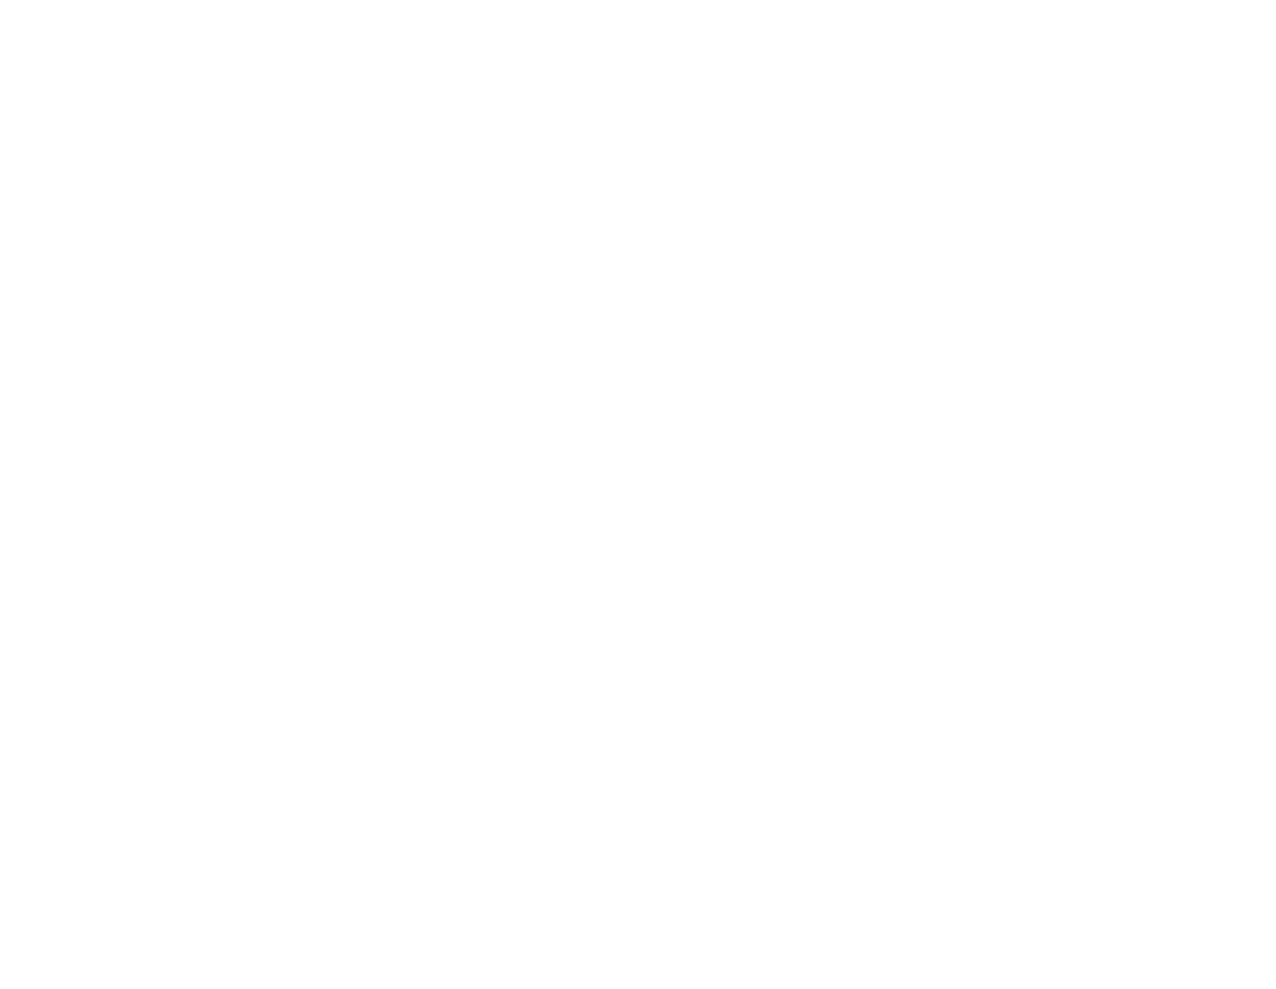 PS5 Logo - Somewhere someone is slaving over the PS5 logo and how to ...